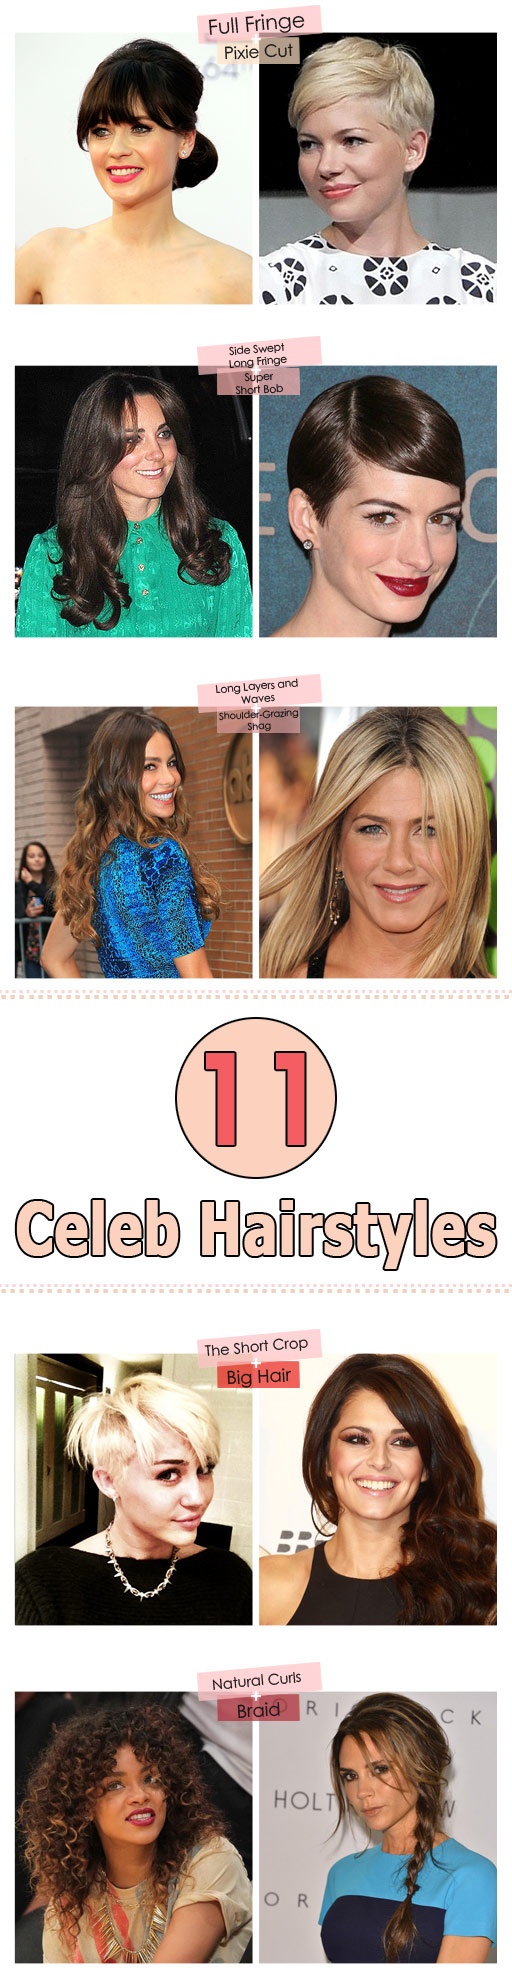 160 Best Images About Hot Celebrity Hairstyles On